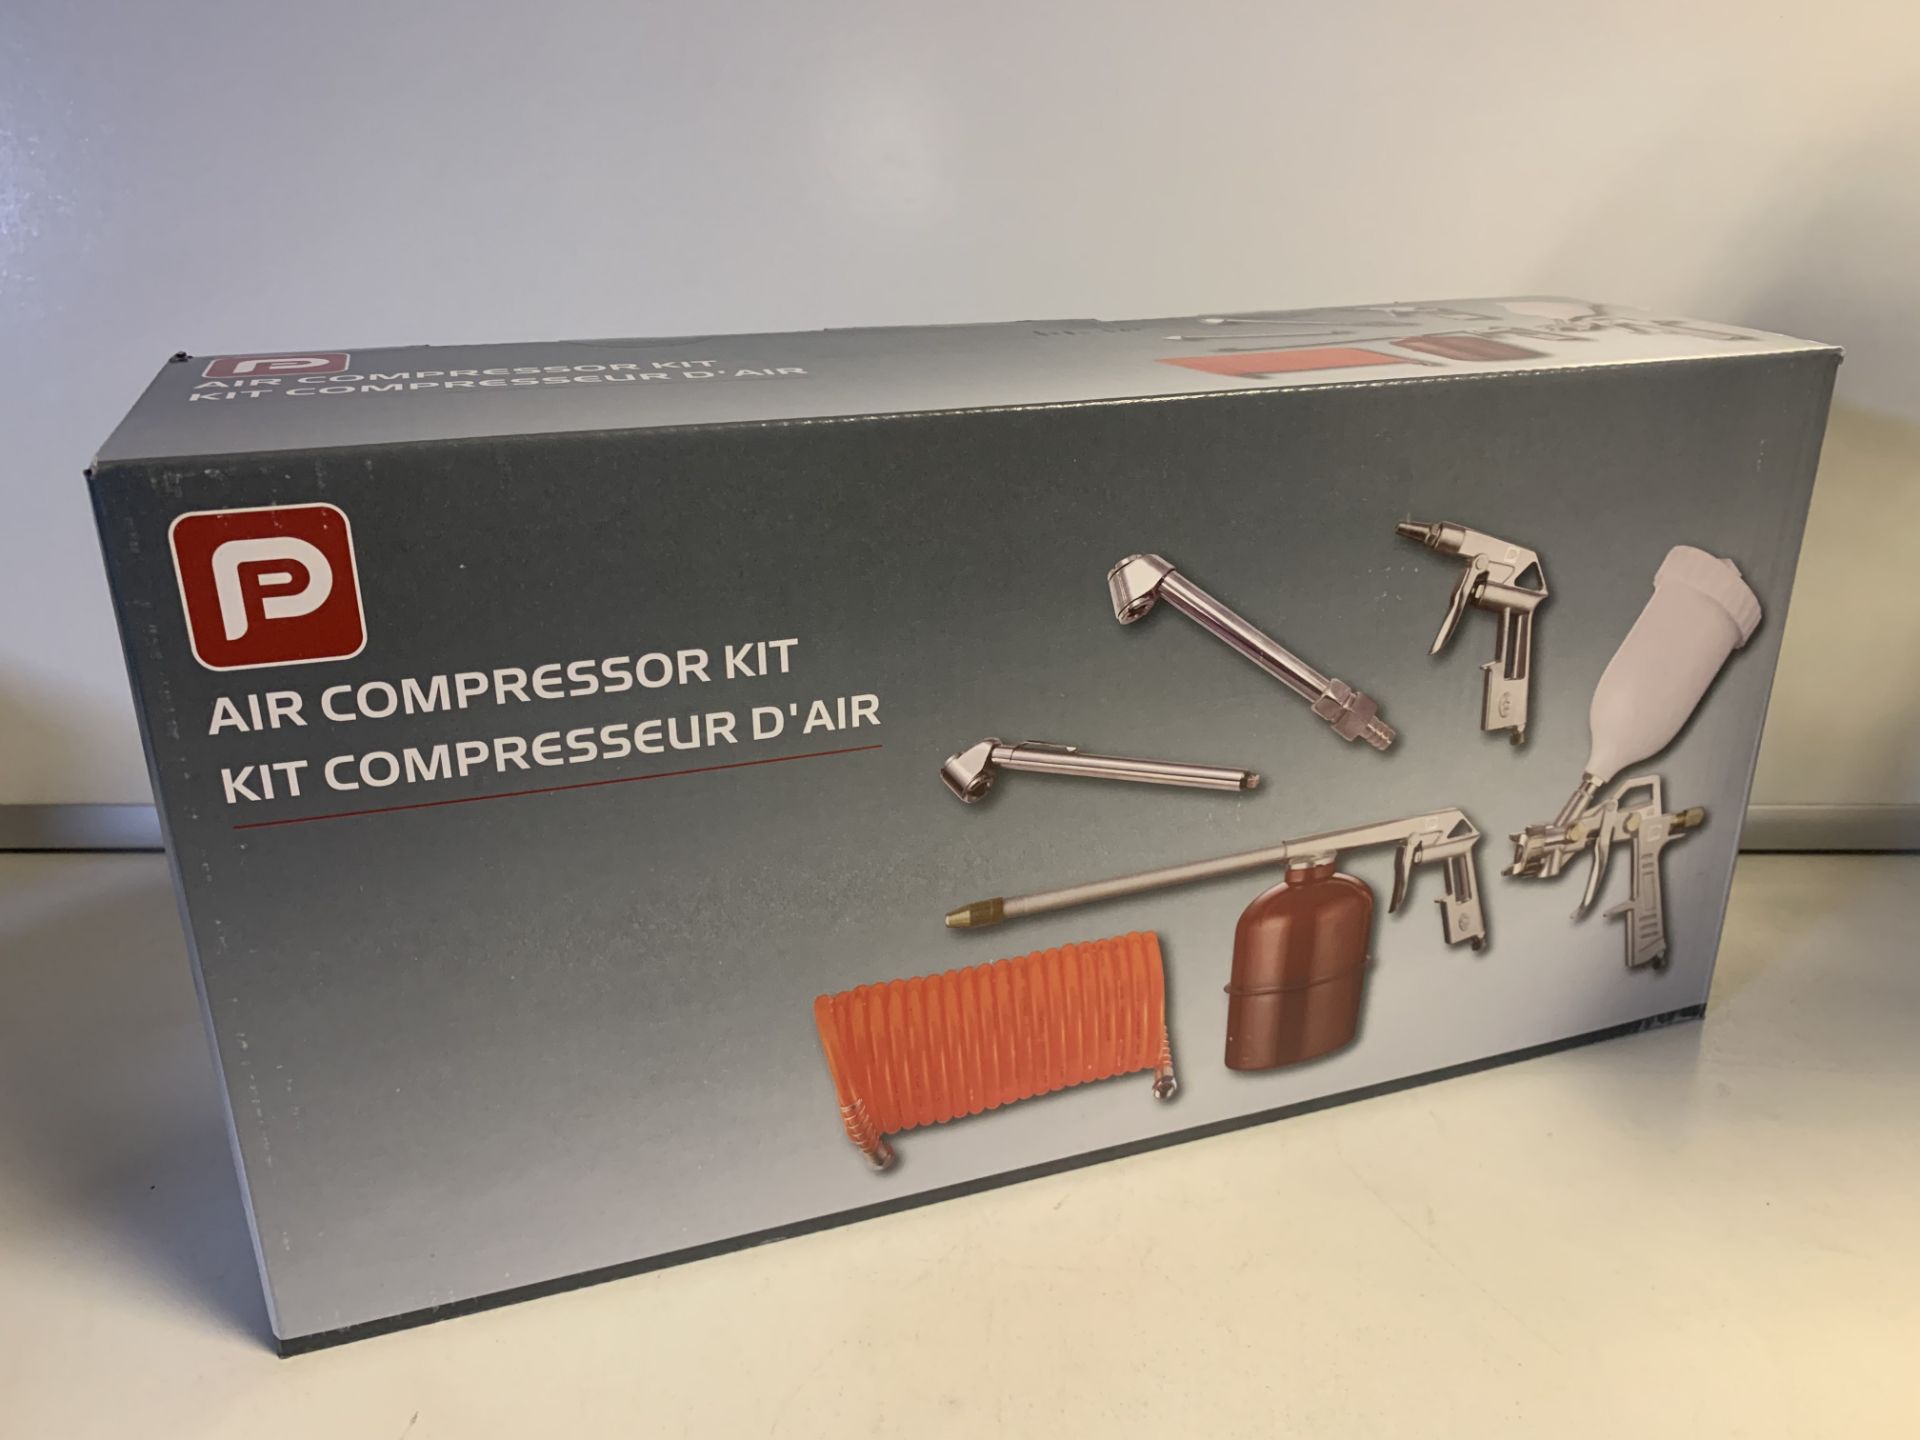 NEW BOXED PP 5 PIECE AIR COMPRESSOR KIT